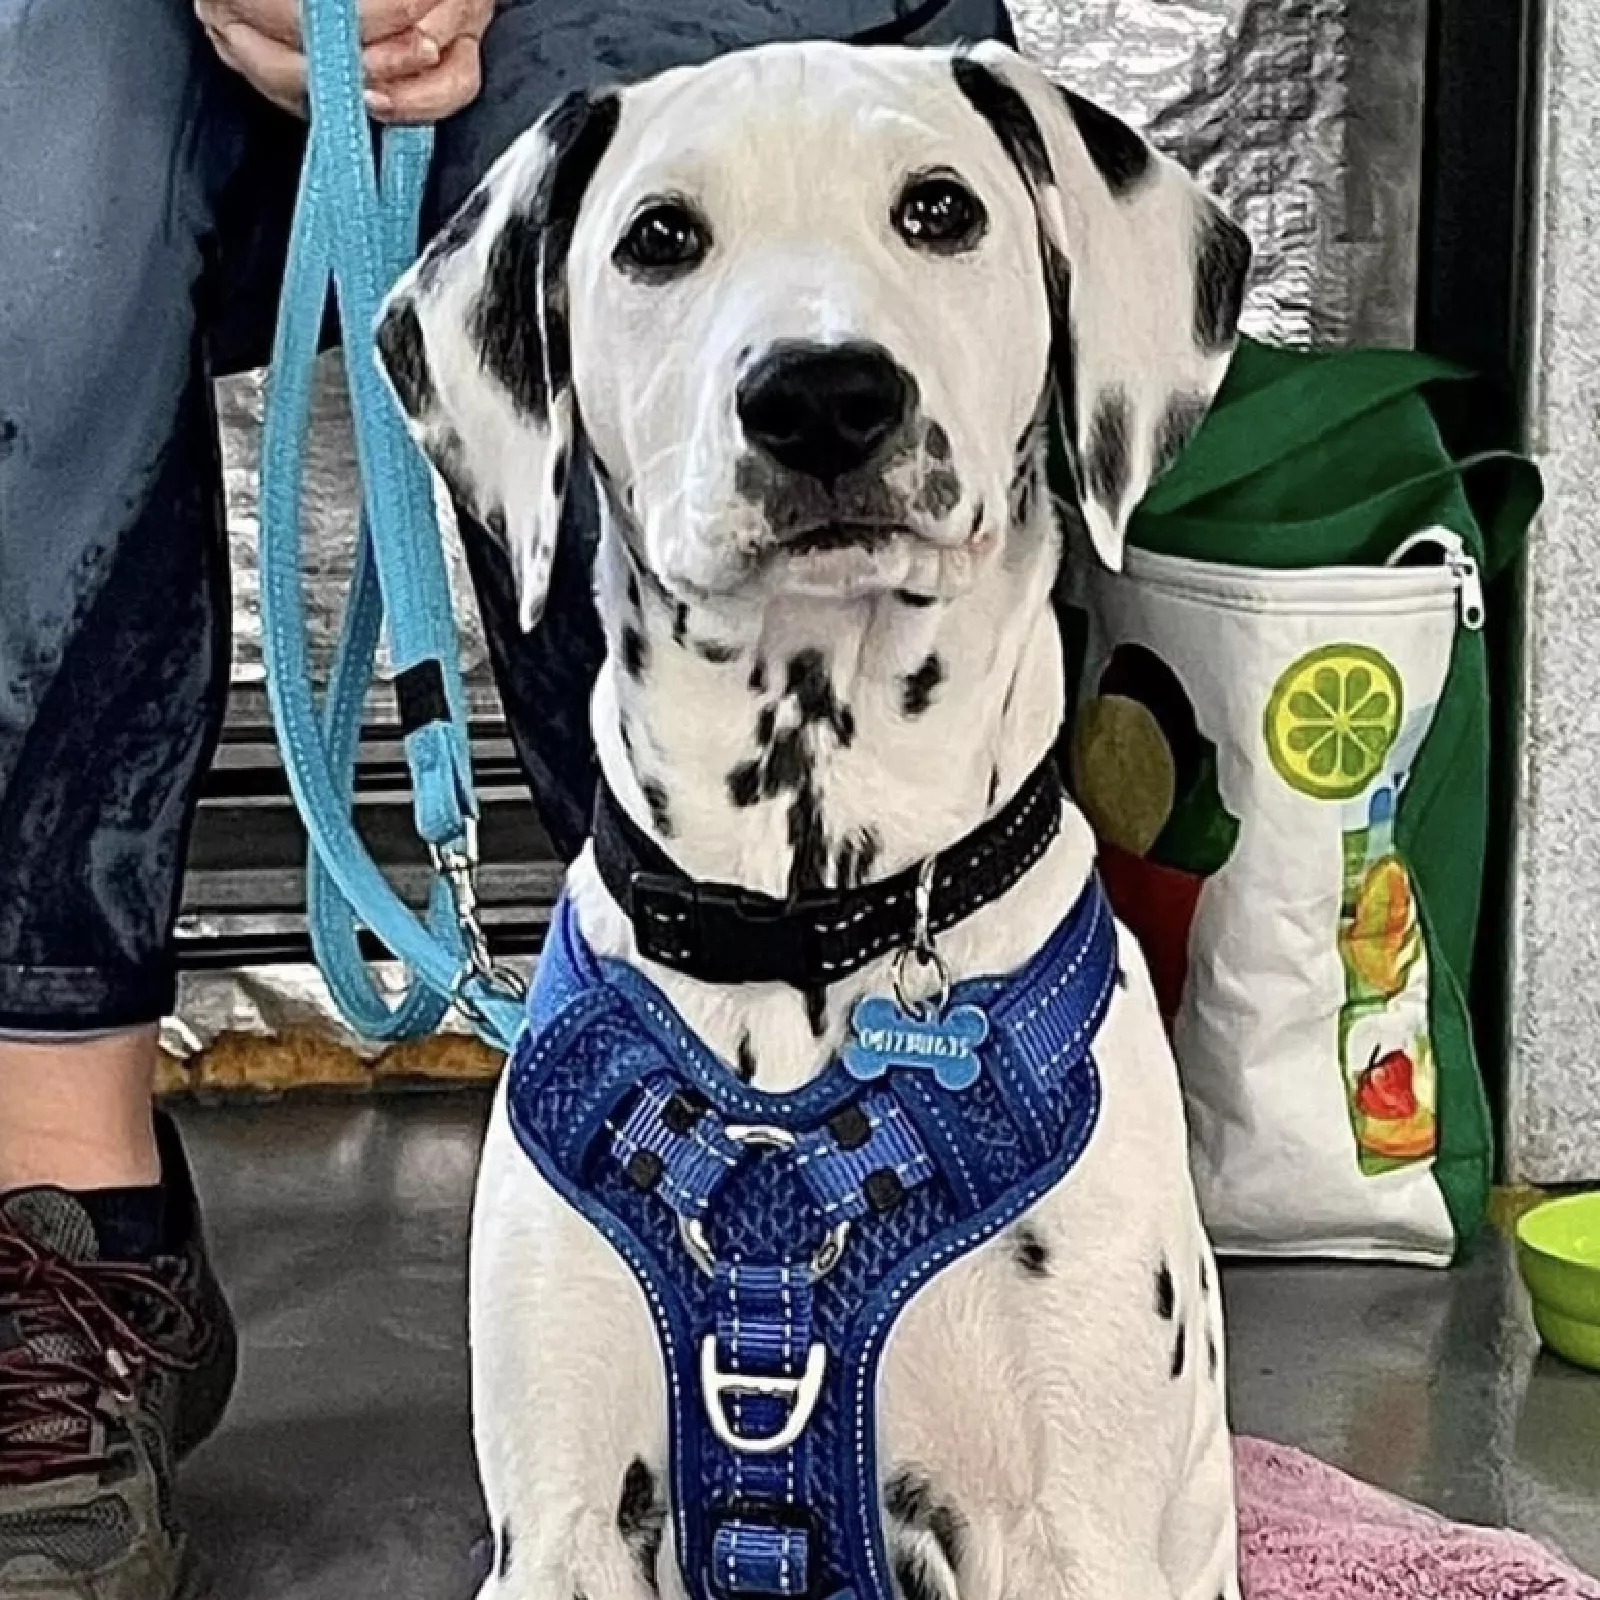 Bonnie, a dalmation, wearing an adjustable harness at training